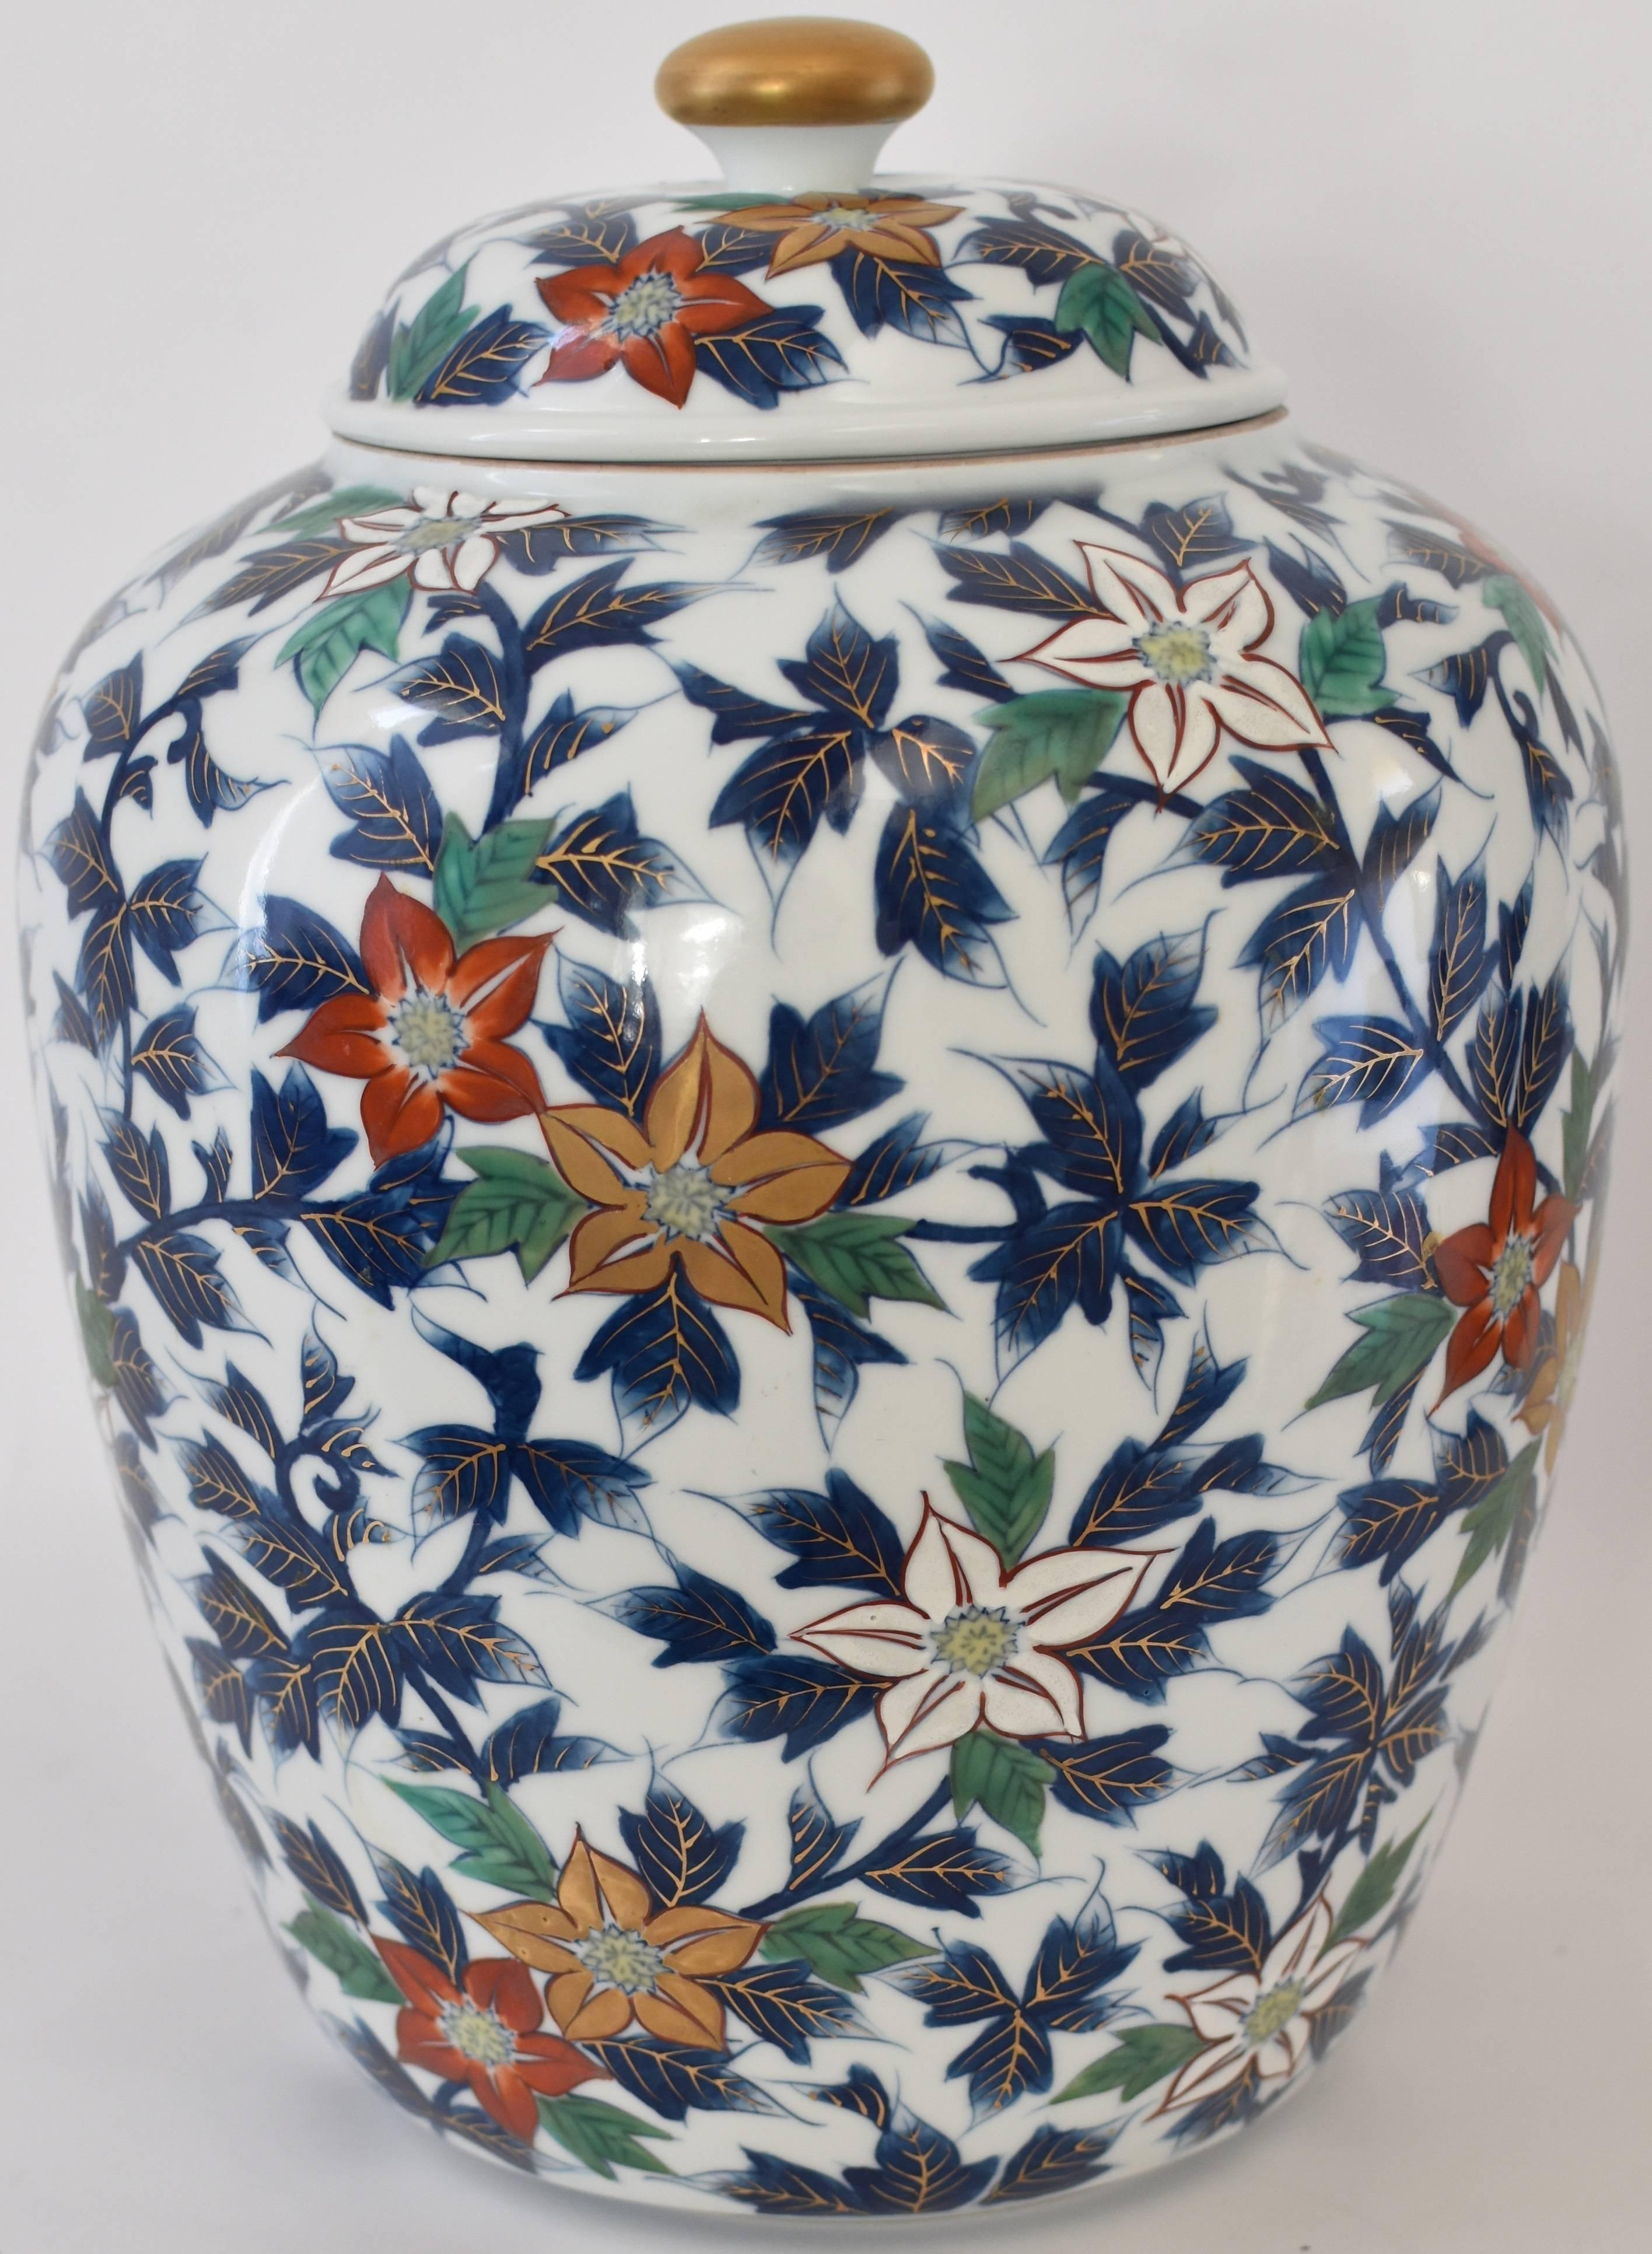 Japanese lidded porcelain temple jar, hand-painted in vivid blue, green, red and gold on an elegant ovoid shape body is a signed piece of the Shozan Kiln in the Imari-Arita region of southern Japan.
The vase depicts eye-catching flowers in rust-red,